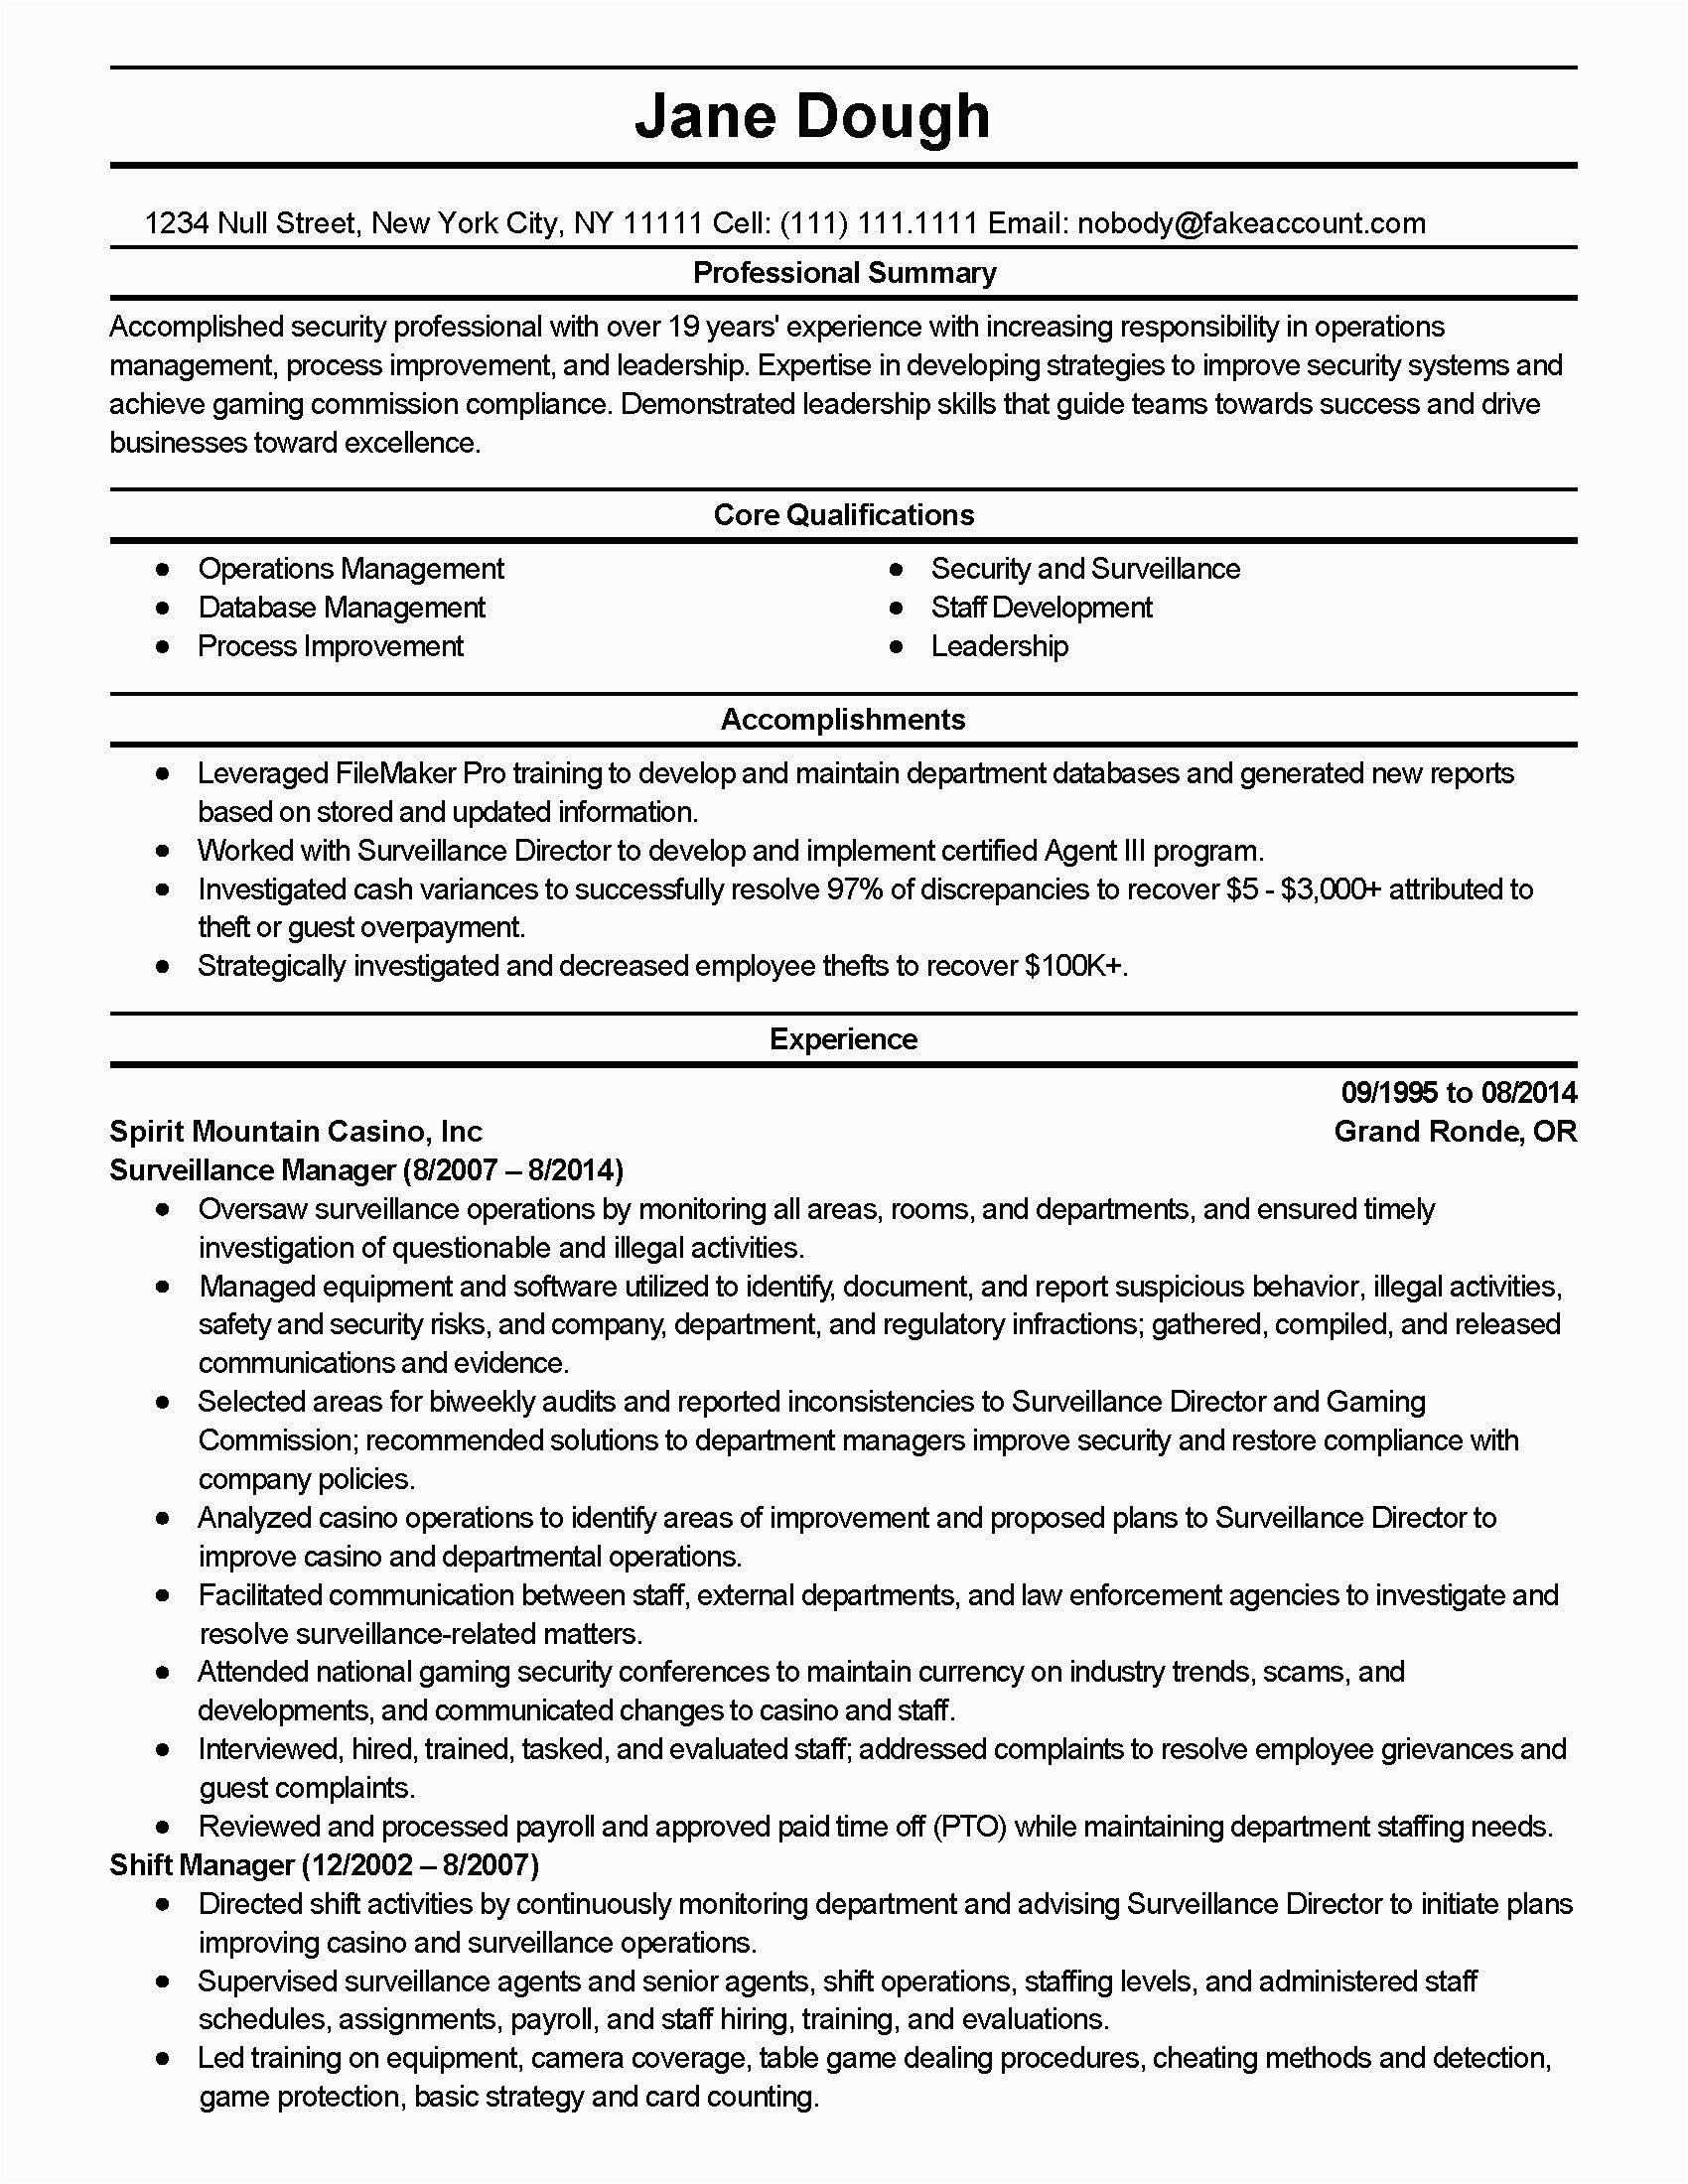 Cybersecurity Resume Sample with No Experience Cyber Security Resume with No Experience Indidas